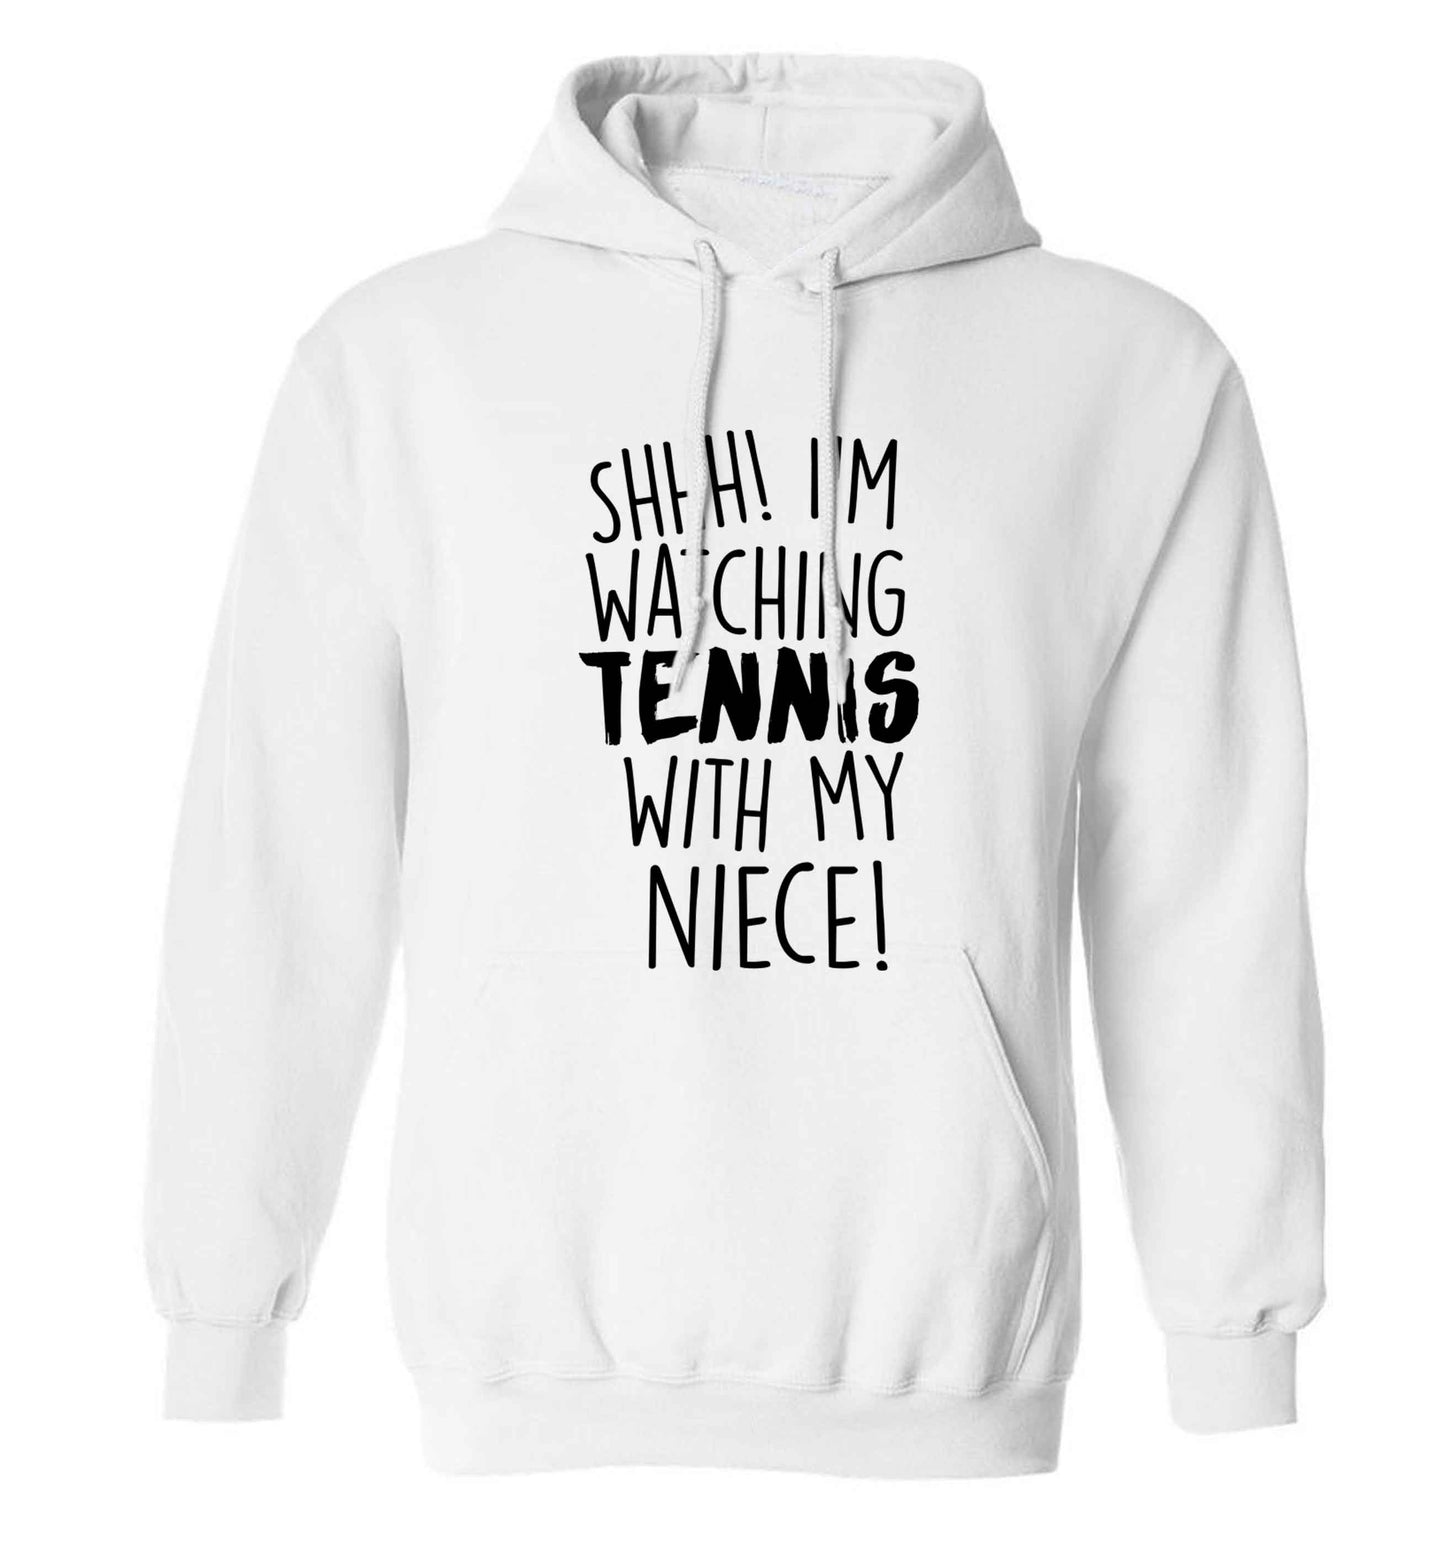 Shh! I'm watching tennis with my niece! adults unisex white hoodie 2XL